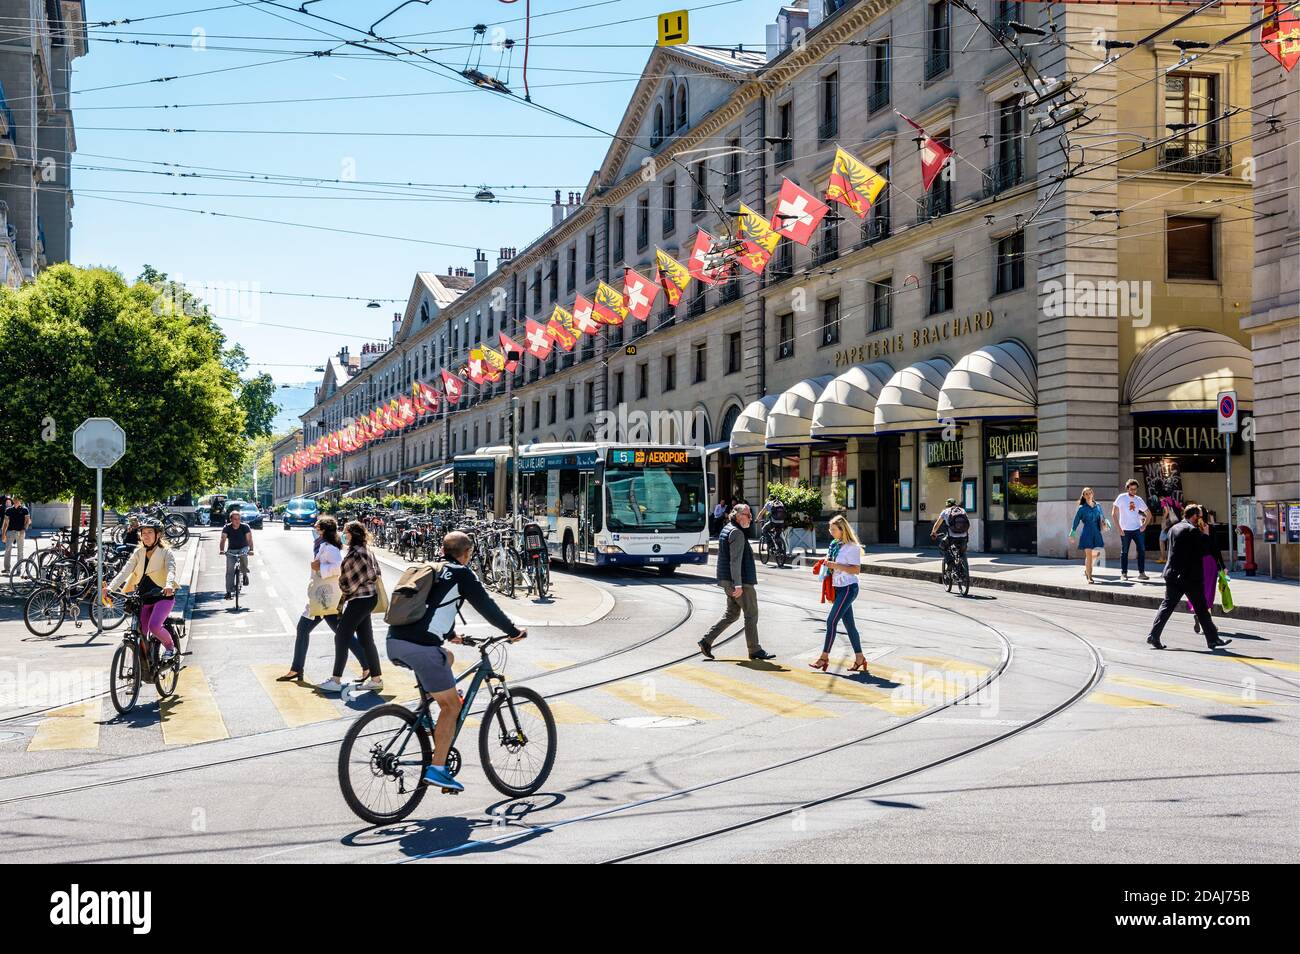 Pedestrians and cyclists are crossing the rue de la Corraterie in Geneva, with buildings decked with flags, as a bus is waiting at a red light. Stock Photo